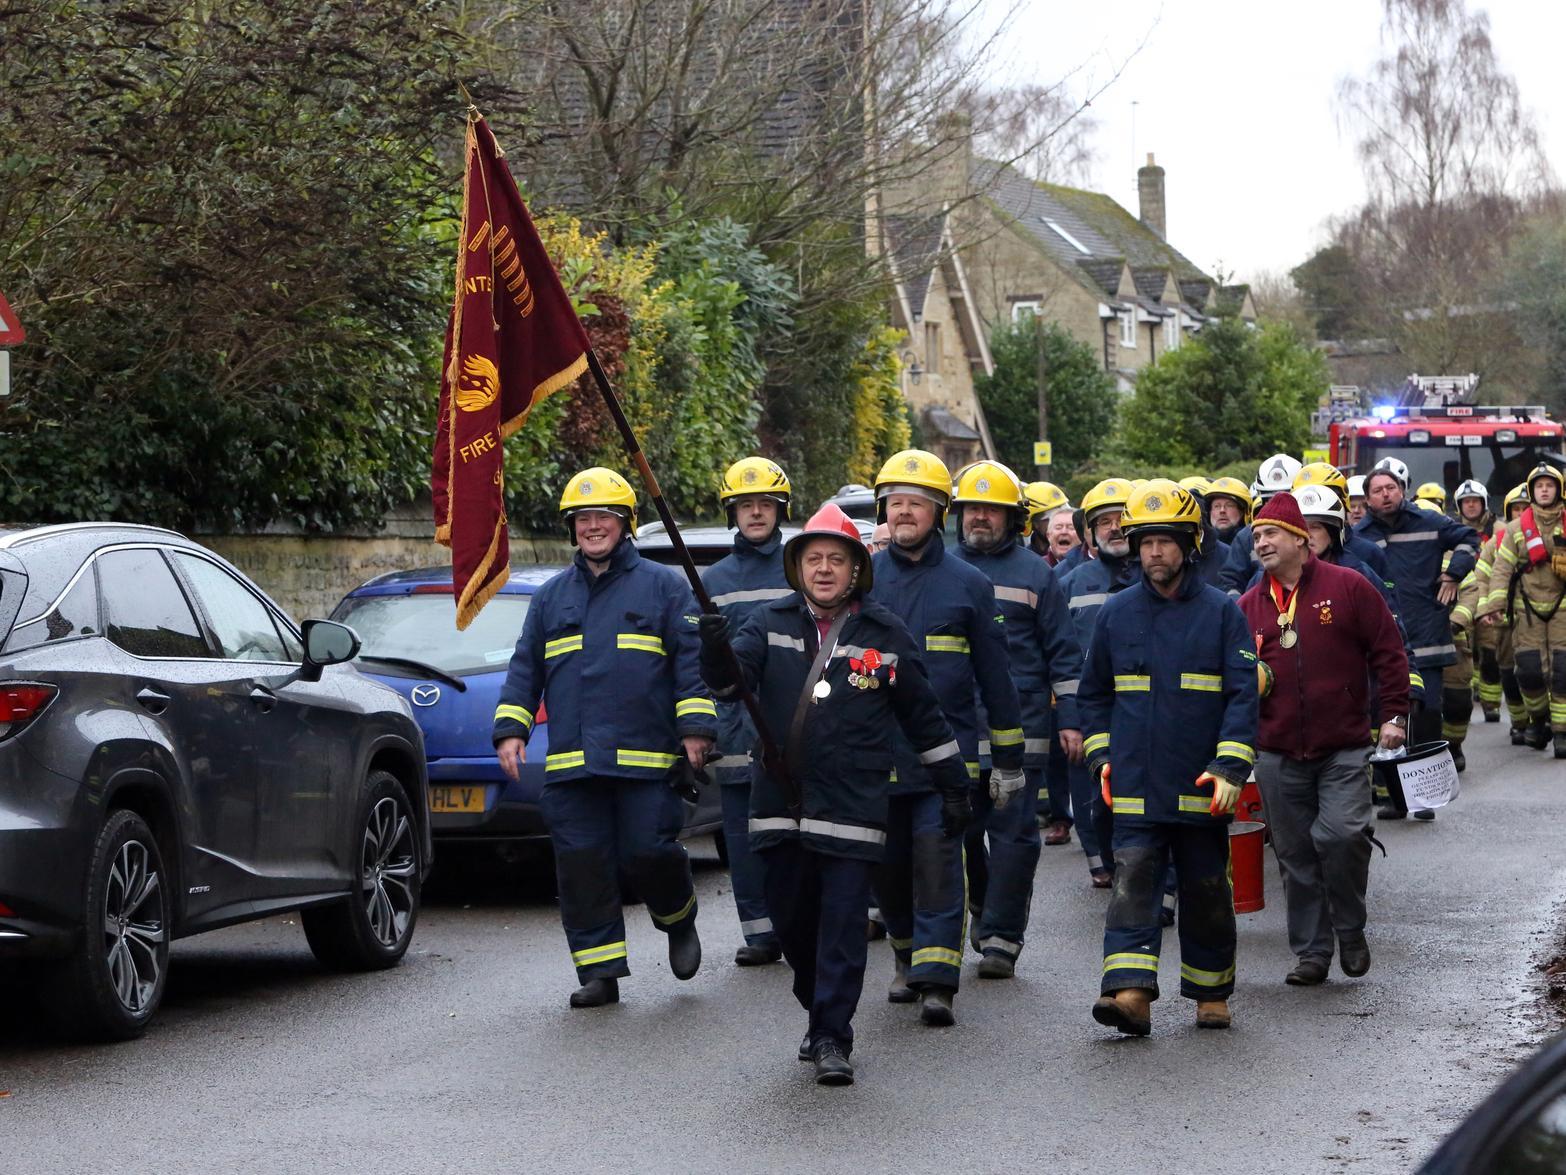 Before the fight, the crews parade through Geddington on their way to the ford